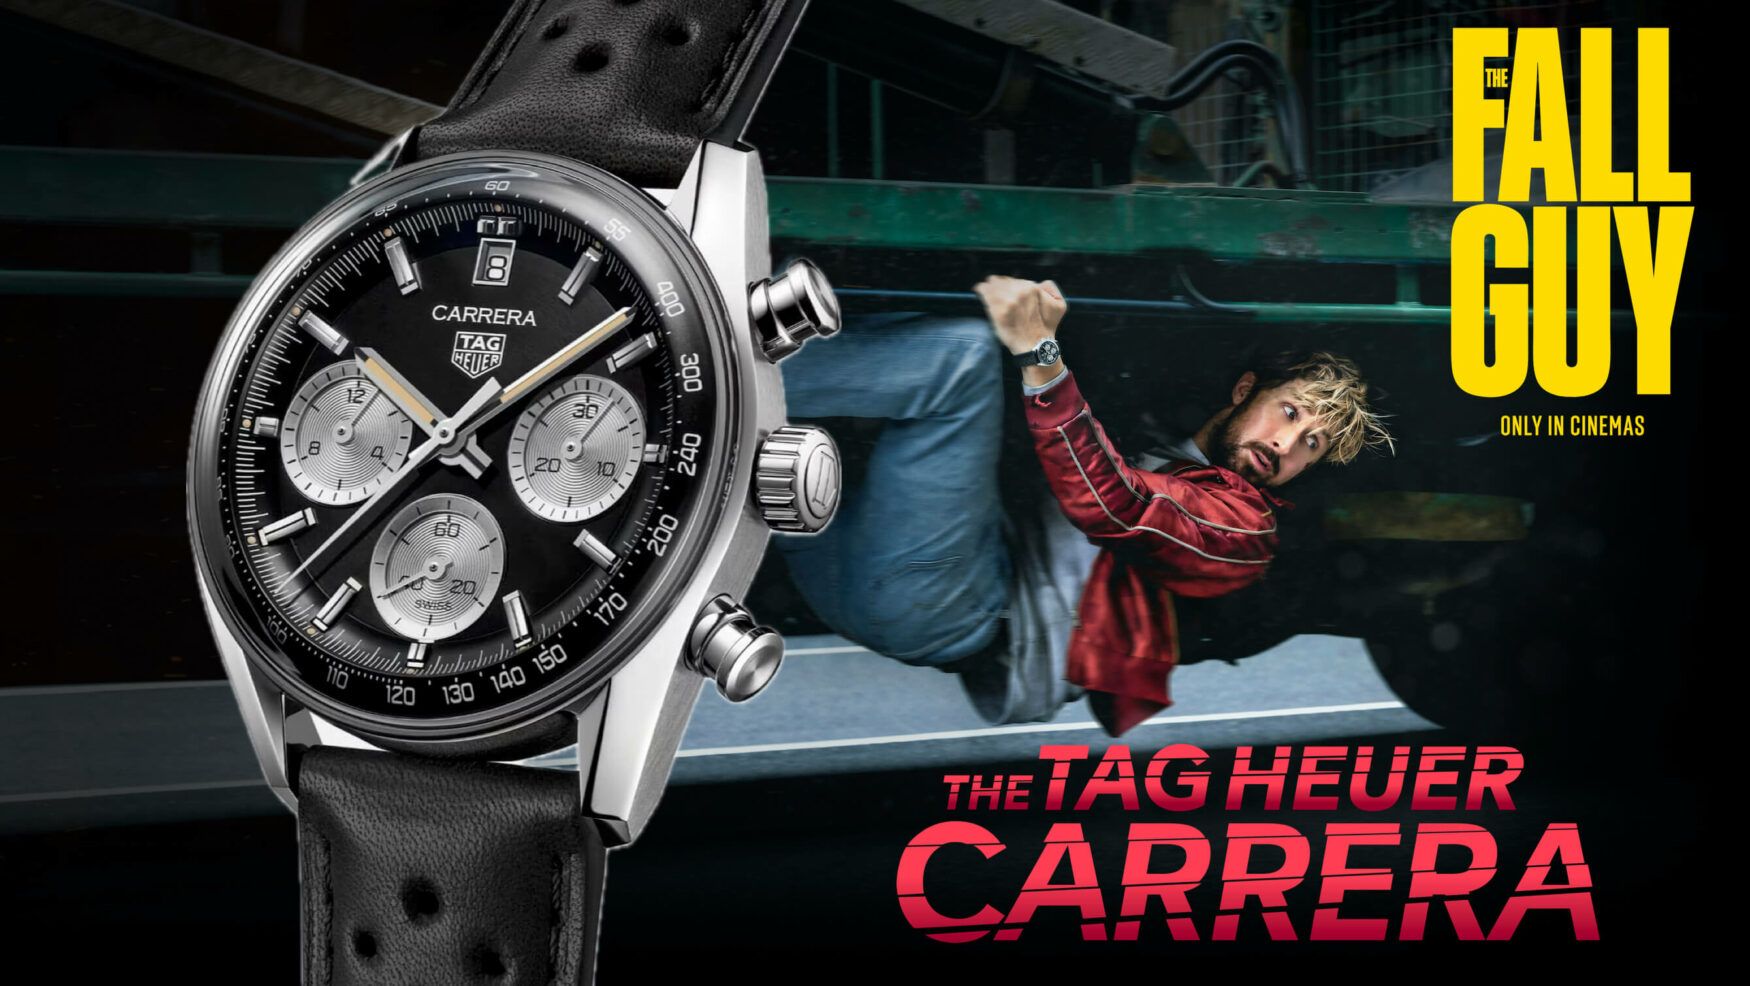 This is the TAG Heuer Ryan Gosling wears in new film The Fall Guy